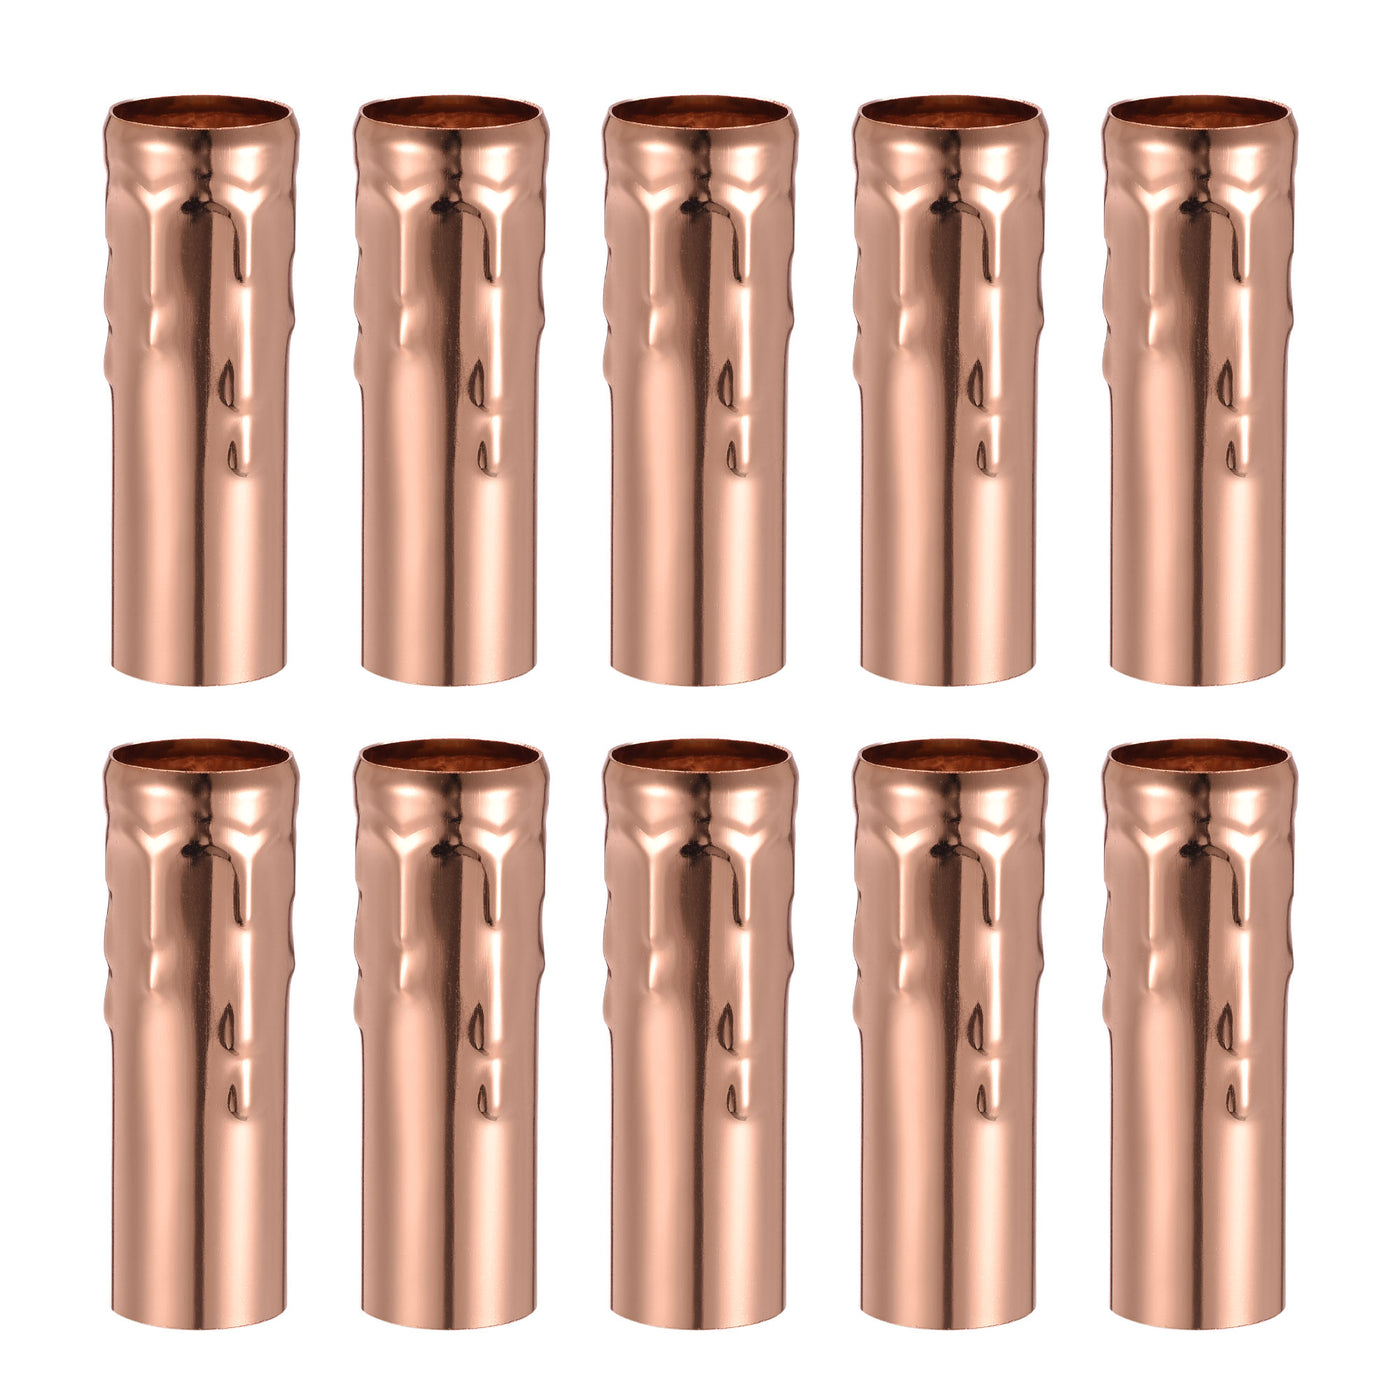 Uxcell Uxcell Candle Shape Socket Covers Sleeves 3 Inch Iron Candelabra Base for E14 Chandelier, Rose Gold Pack of 10